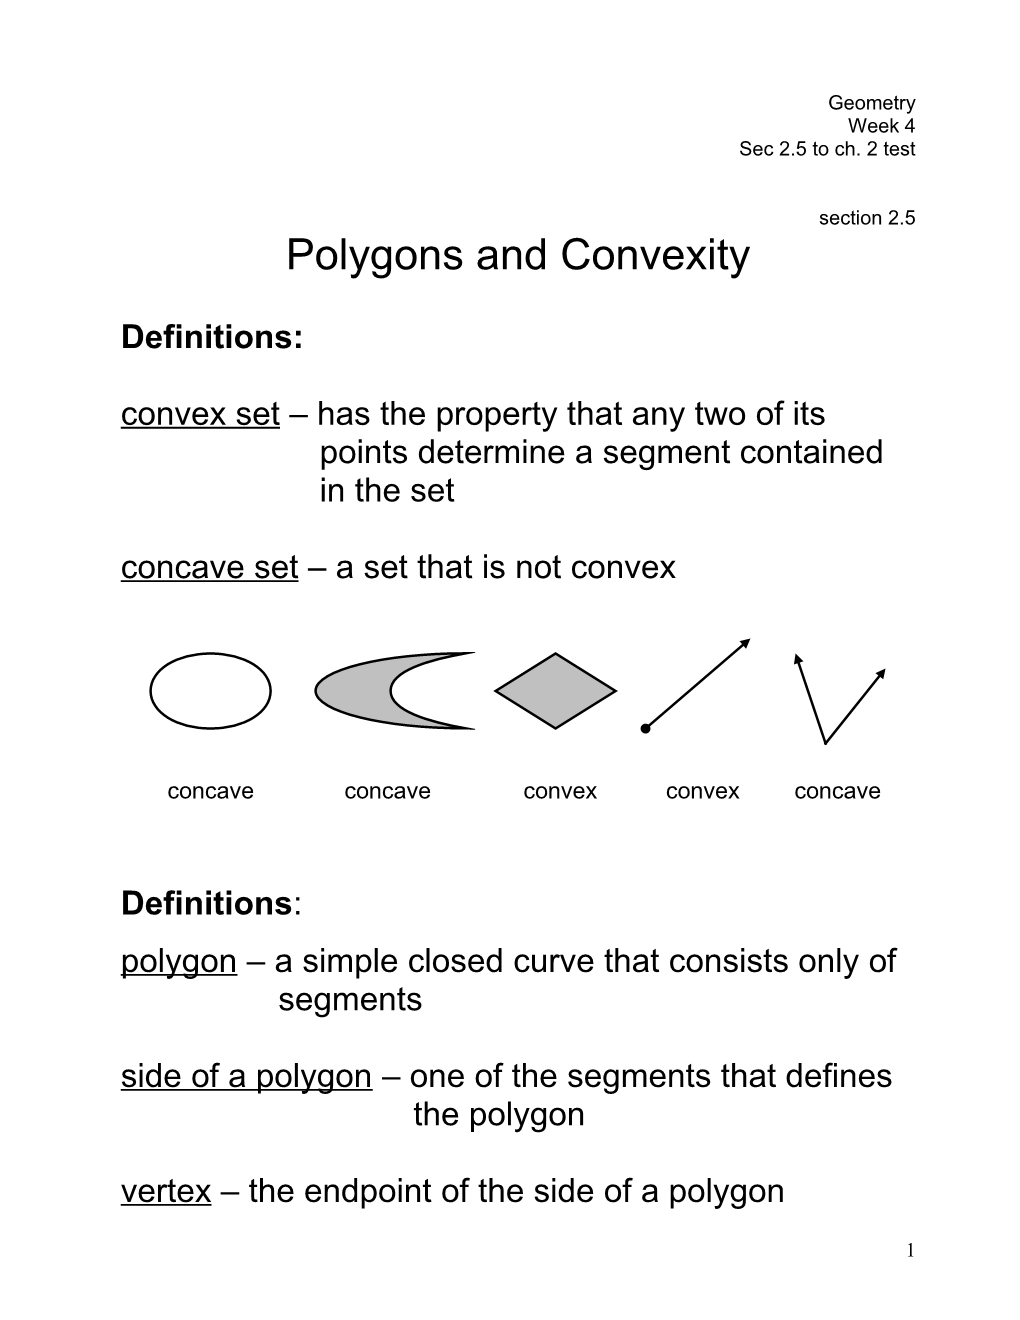 Polygon a Simple Closed Curve That Consists Only of Segments